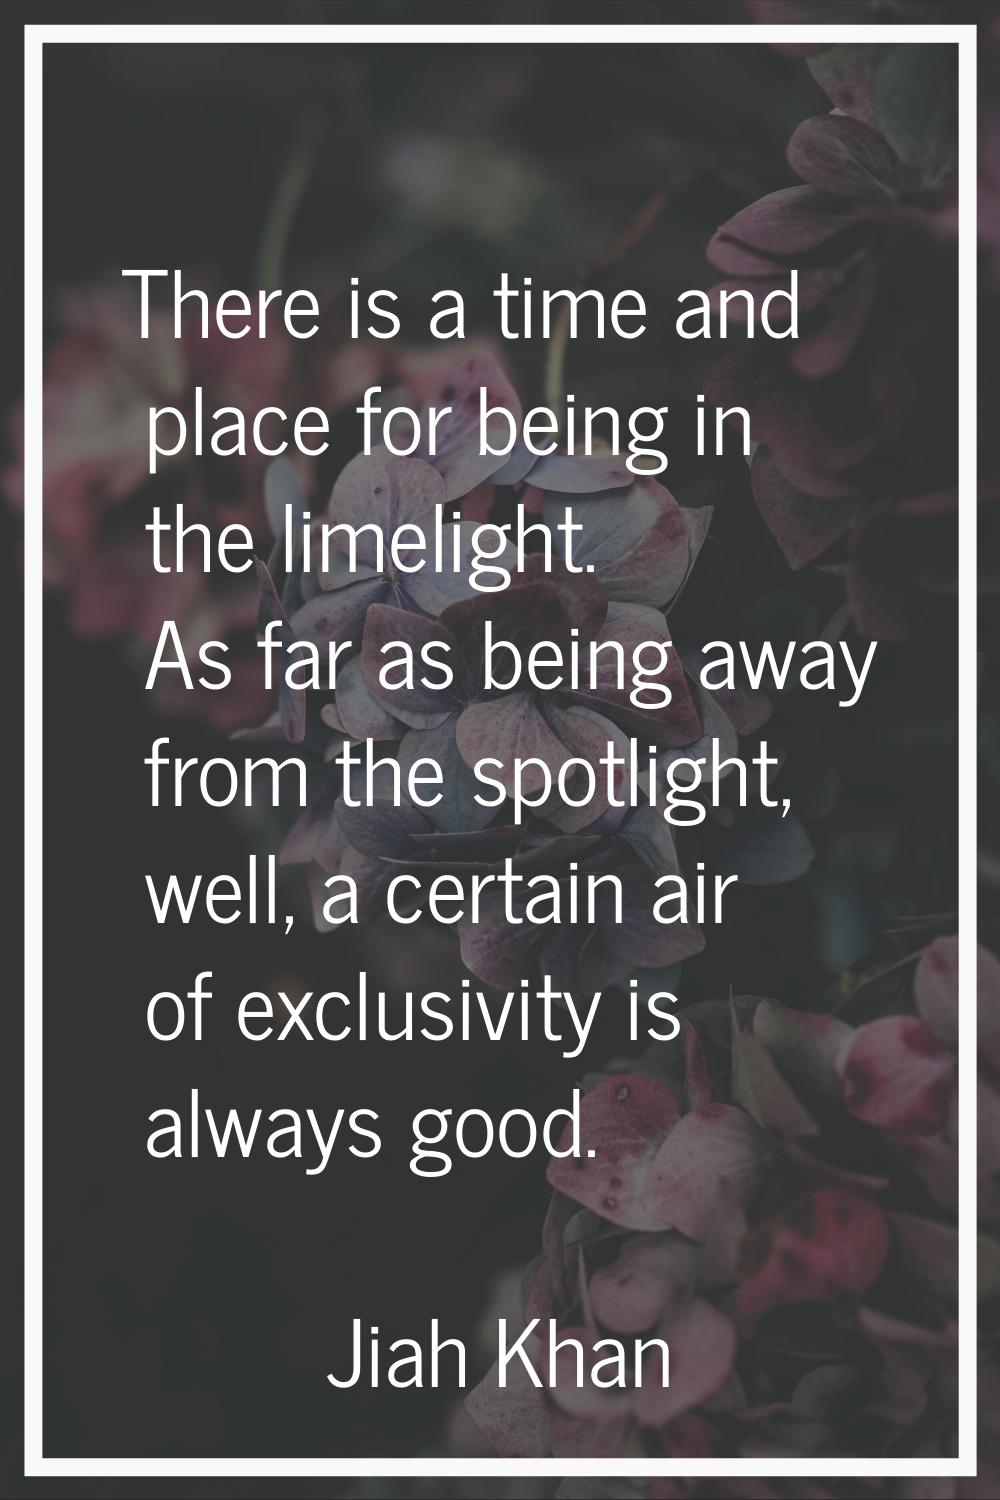 There is a time and place for being in the limelight. As far as being away from the spotlight, well